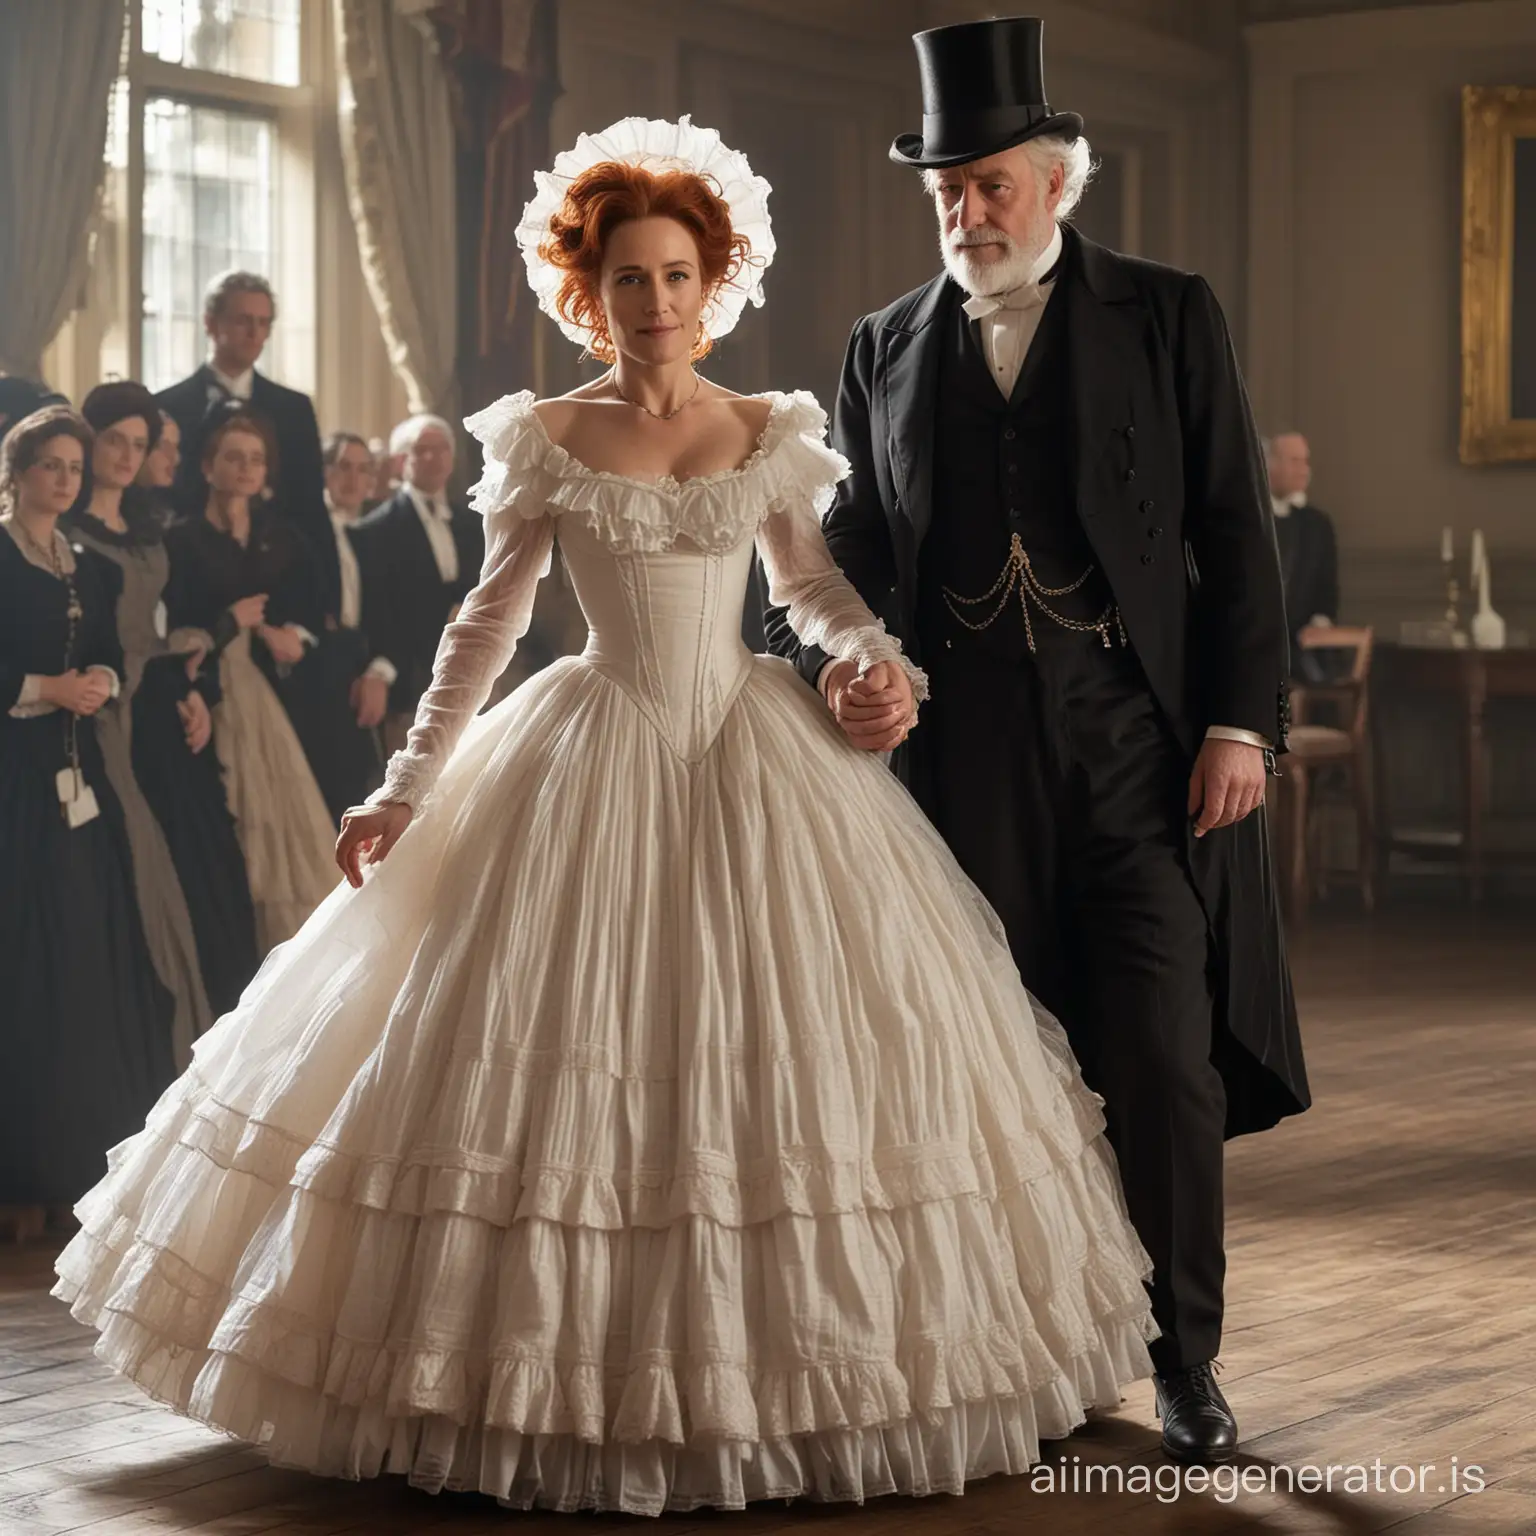 red hair Gillian Anderson wearing a dark brown floor-length loose billowing 1860 victorian crinoline poofy dress with a frilly bonnet dancing with an old man dressed into a black victorian suit who seems to be her newlywed husband
